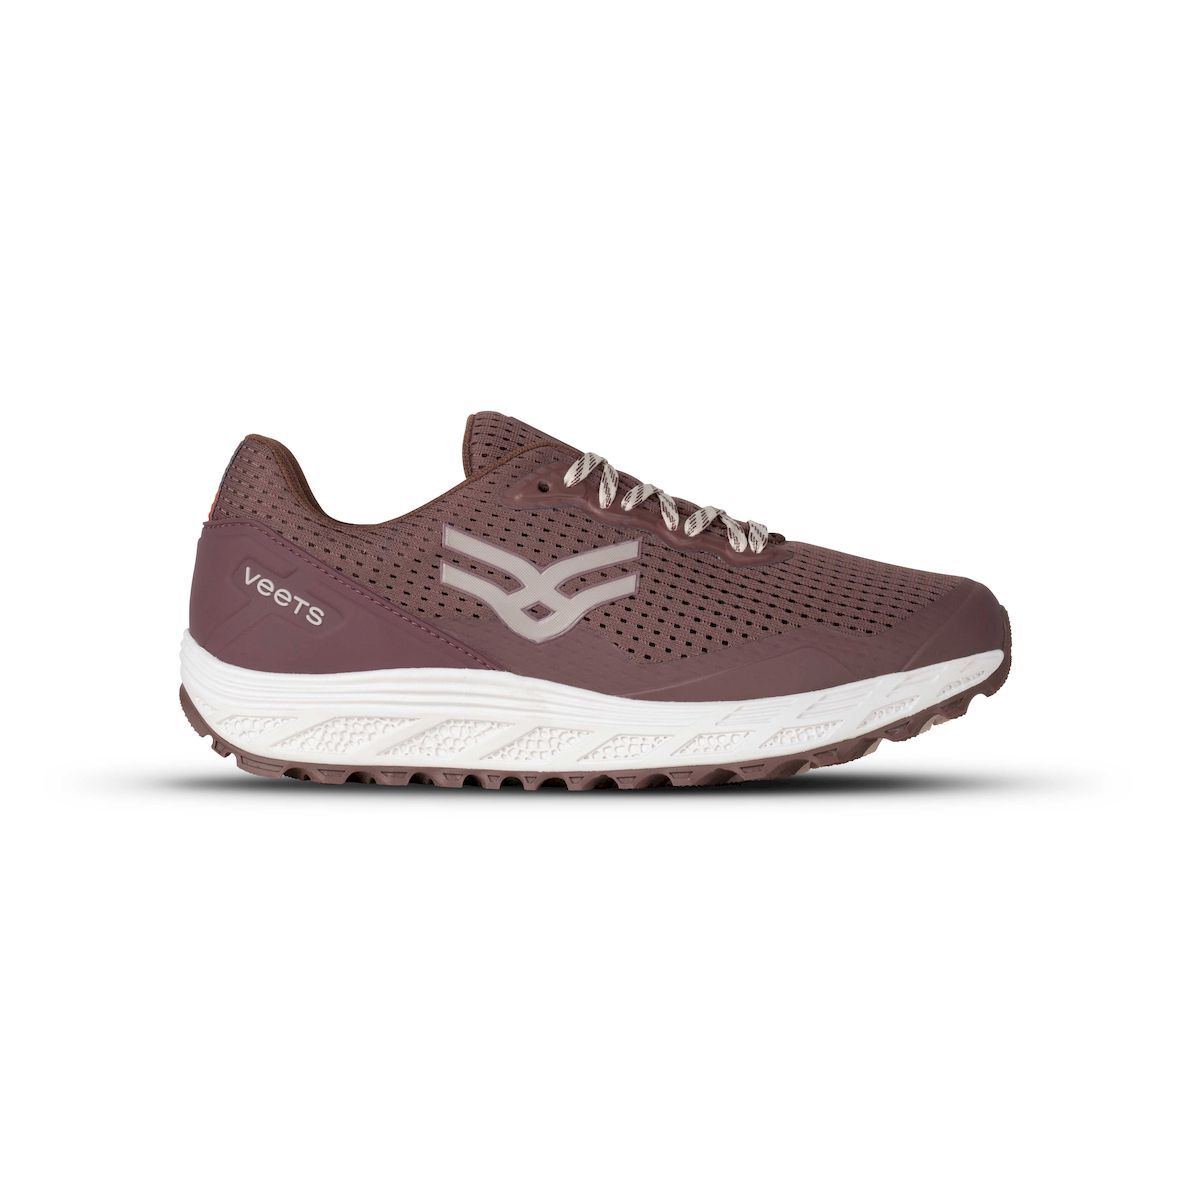 Veets Veloce XTR MIF4 - Trail running shoes - Women's